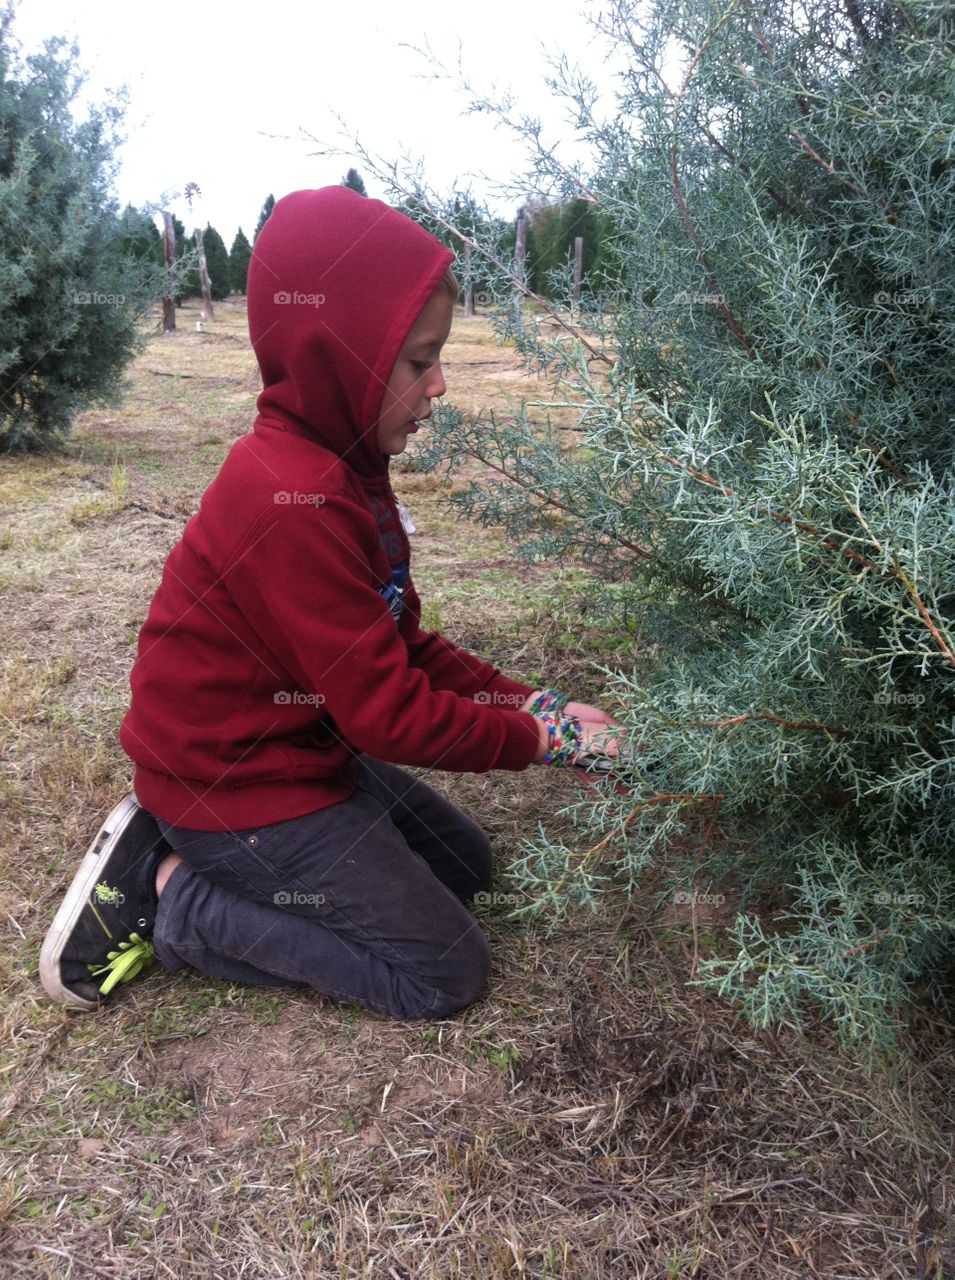 Cutting our Christmas Tree